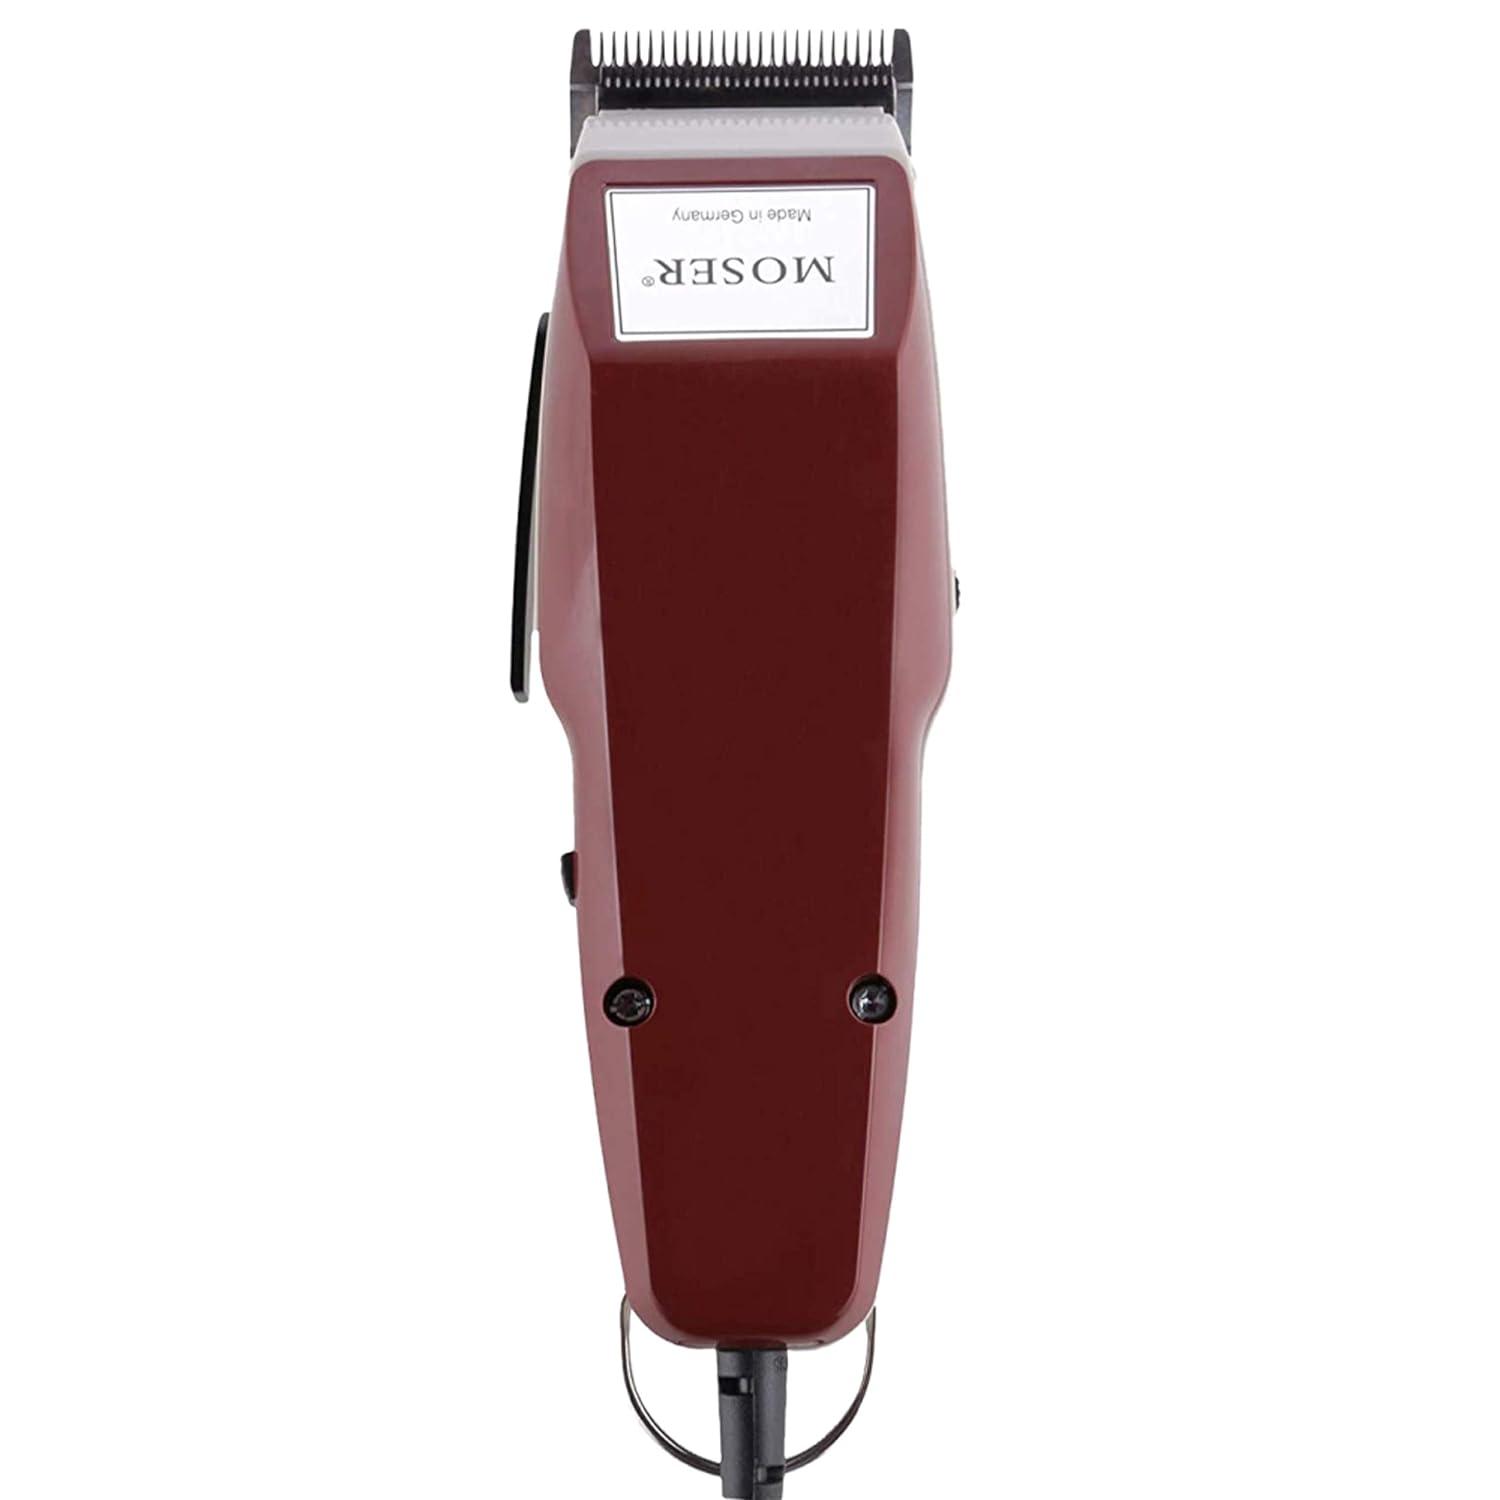 Wahl 01400-0016 Corded Steel Moser Classic Professional Hair Clipper